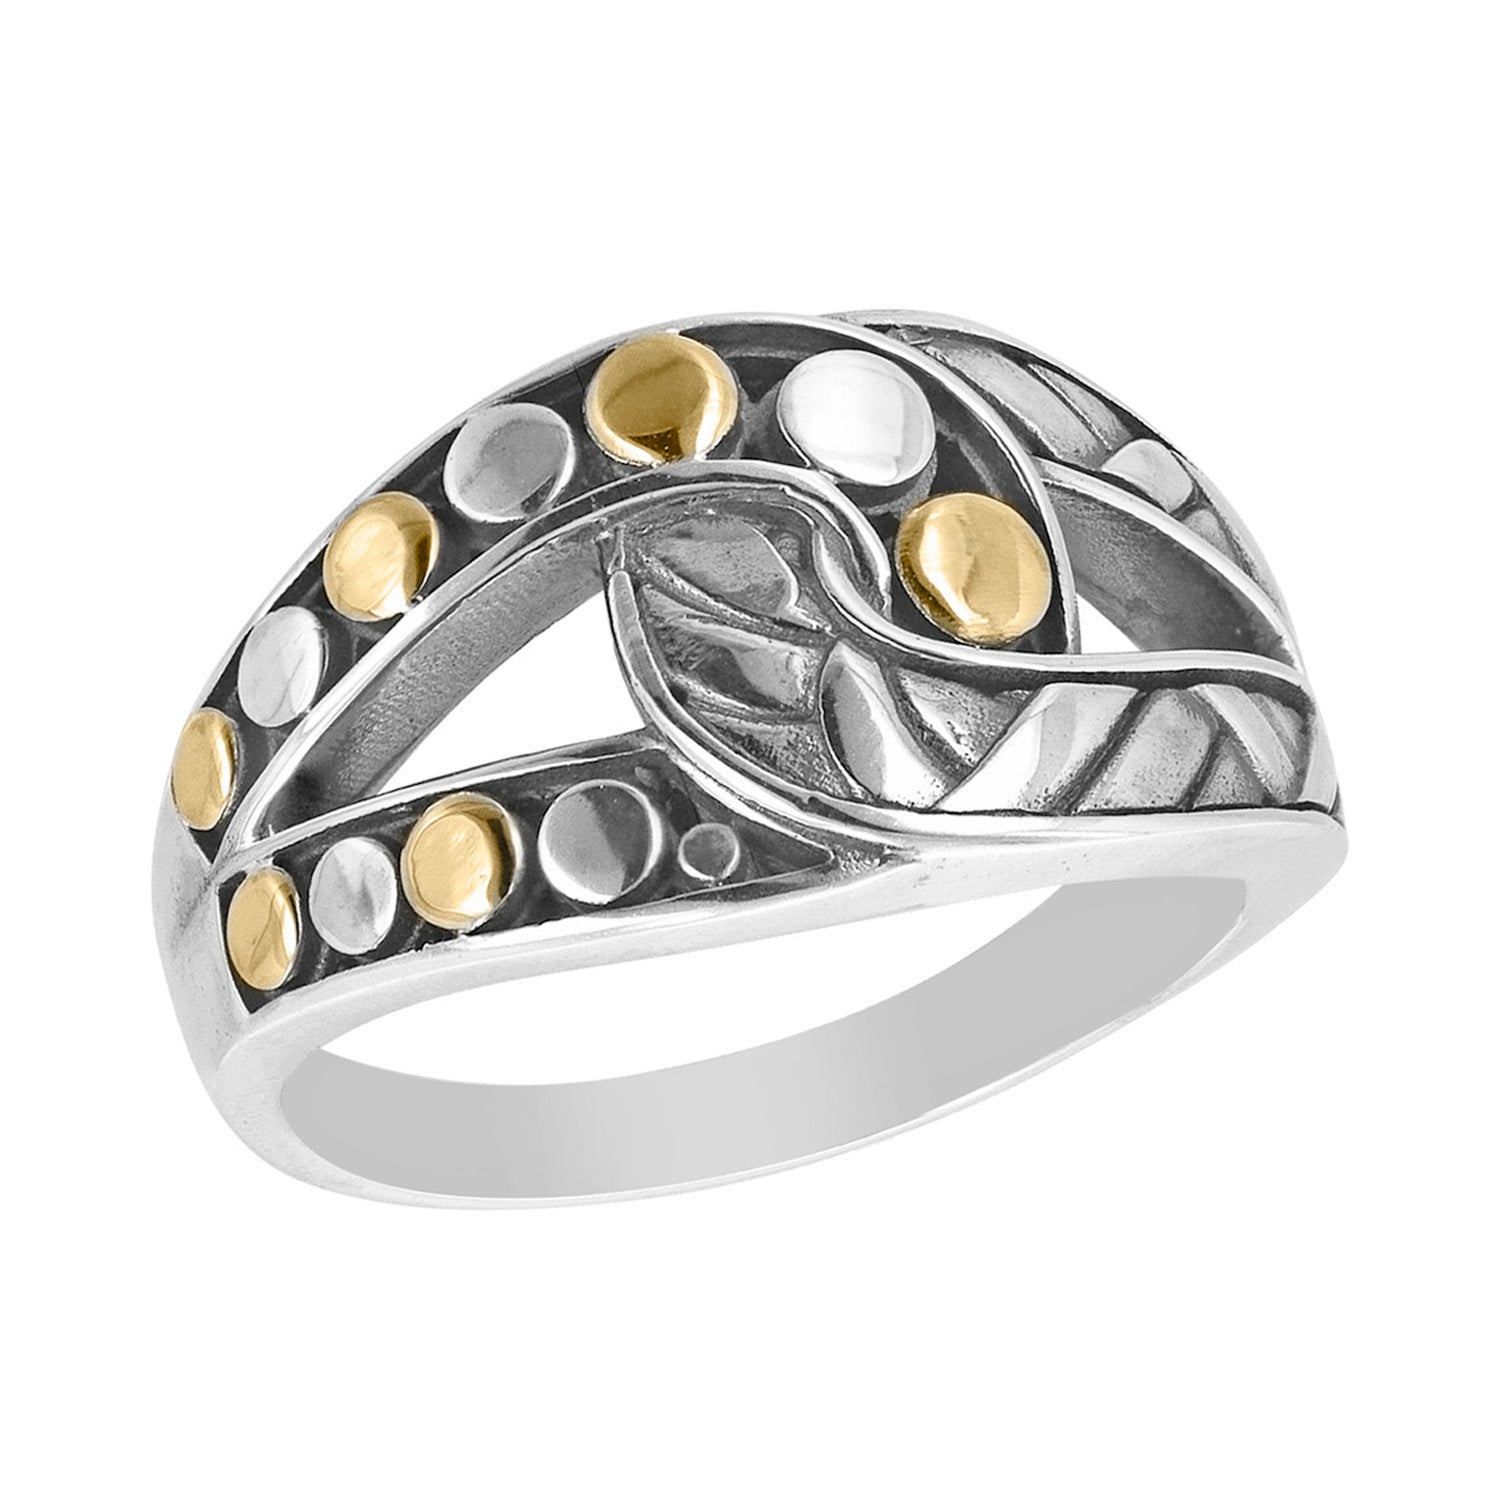 Sterling Silver Intertwined Pattern Ring with 18k Gold Accents